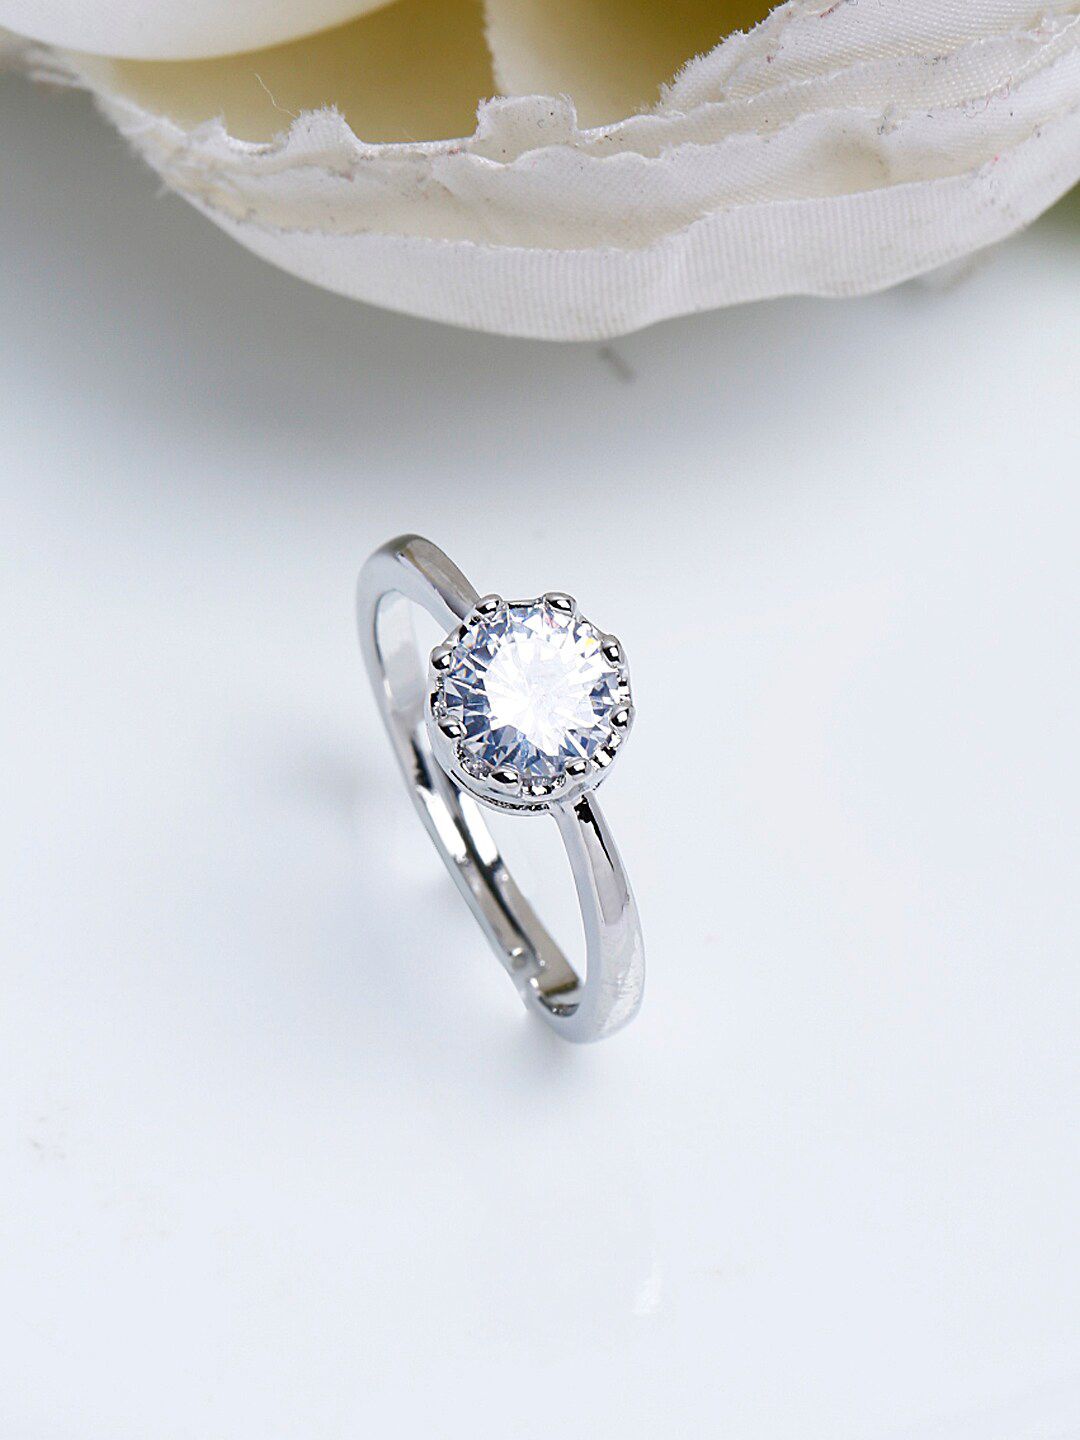 Shining Diva Fashion Platinum-Plated Silver-Toned  White CZ-Studded Adjustable Finger Ring Price in India